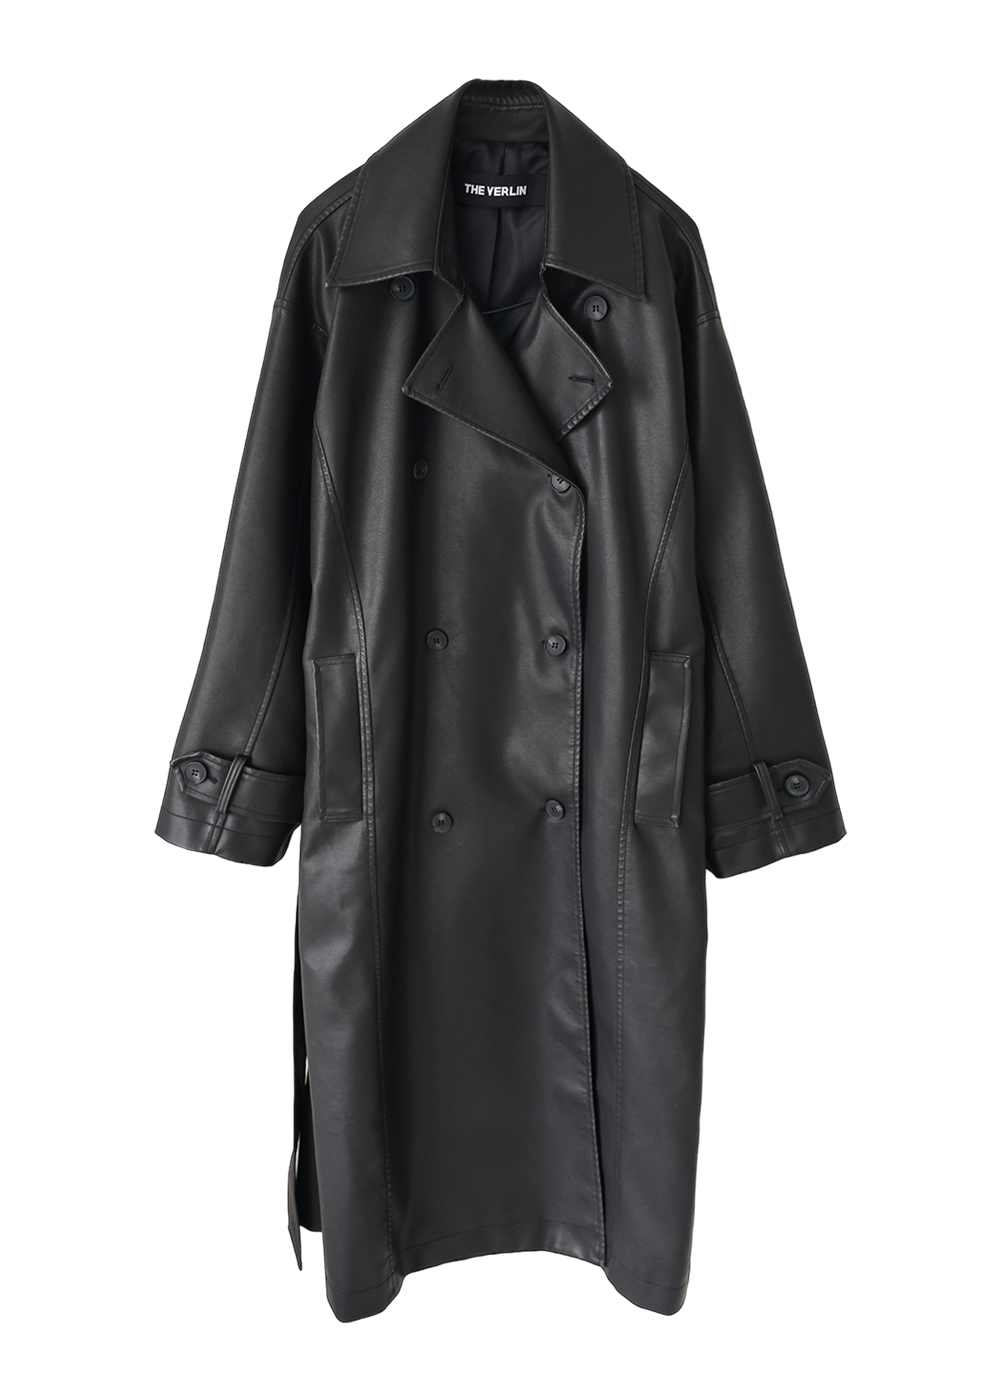 WHASING LEATHER TRENCH COAT